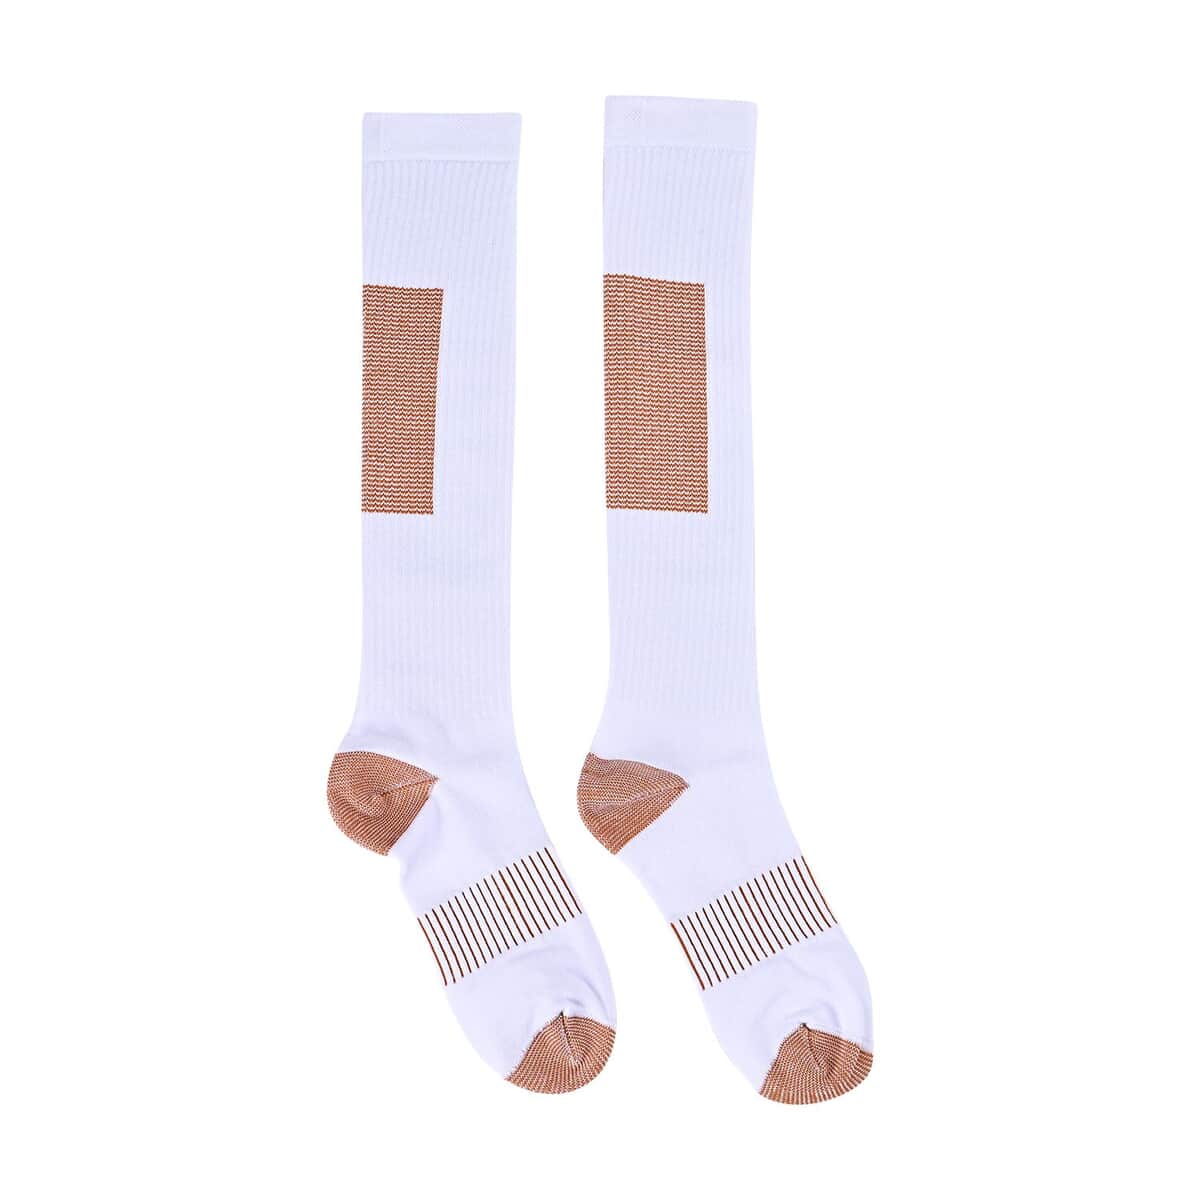 Set of 4 Pairs White 5% Copper Nylon and 95% Spandex Copper Fit Socks (S/M) image number 1